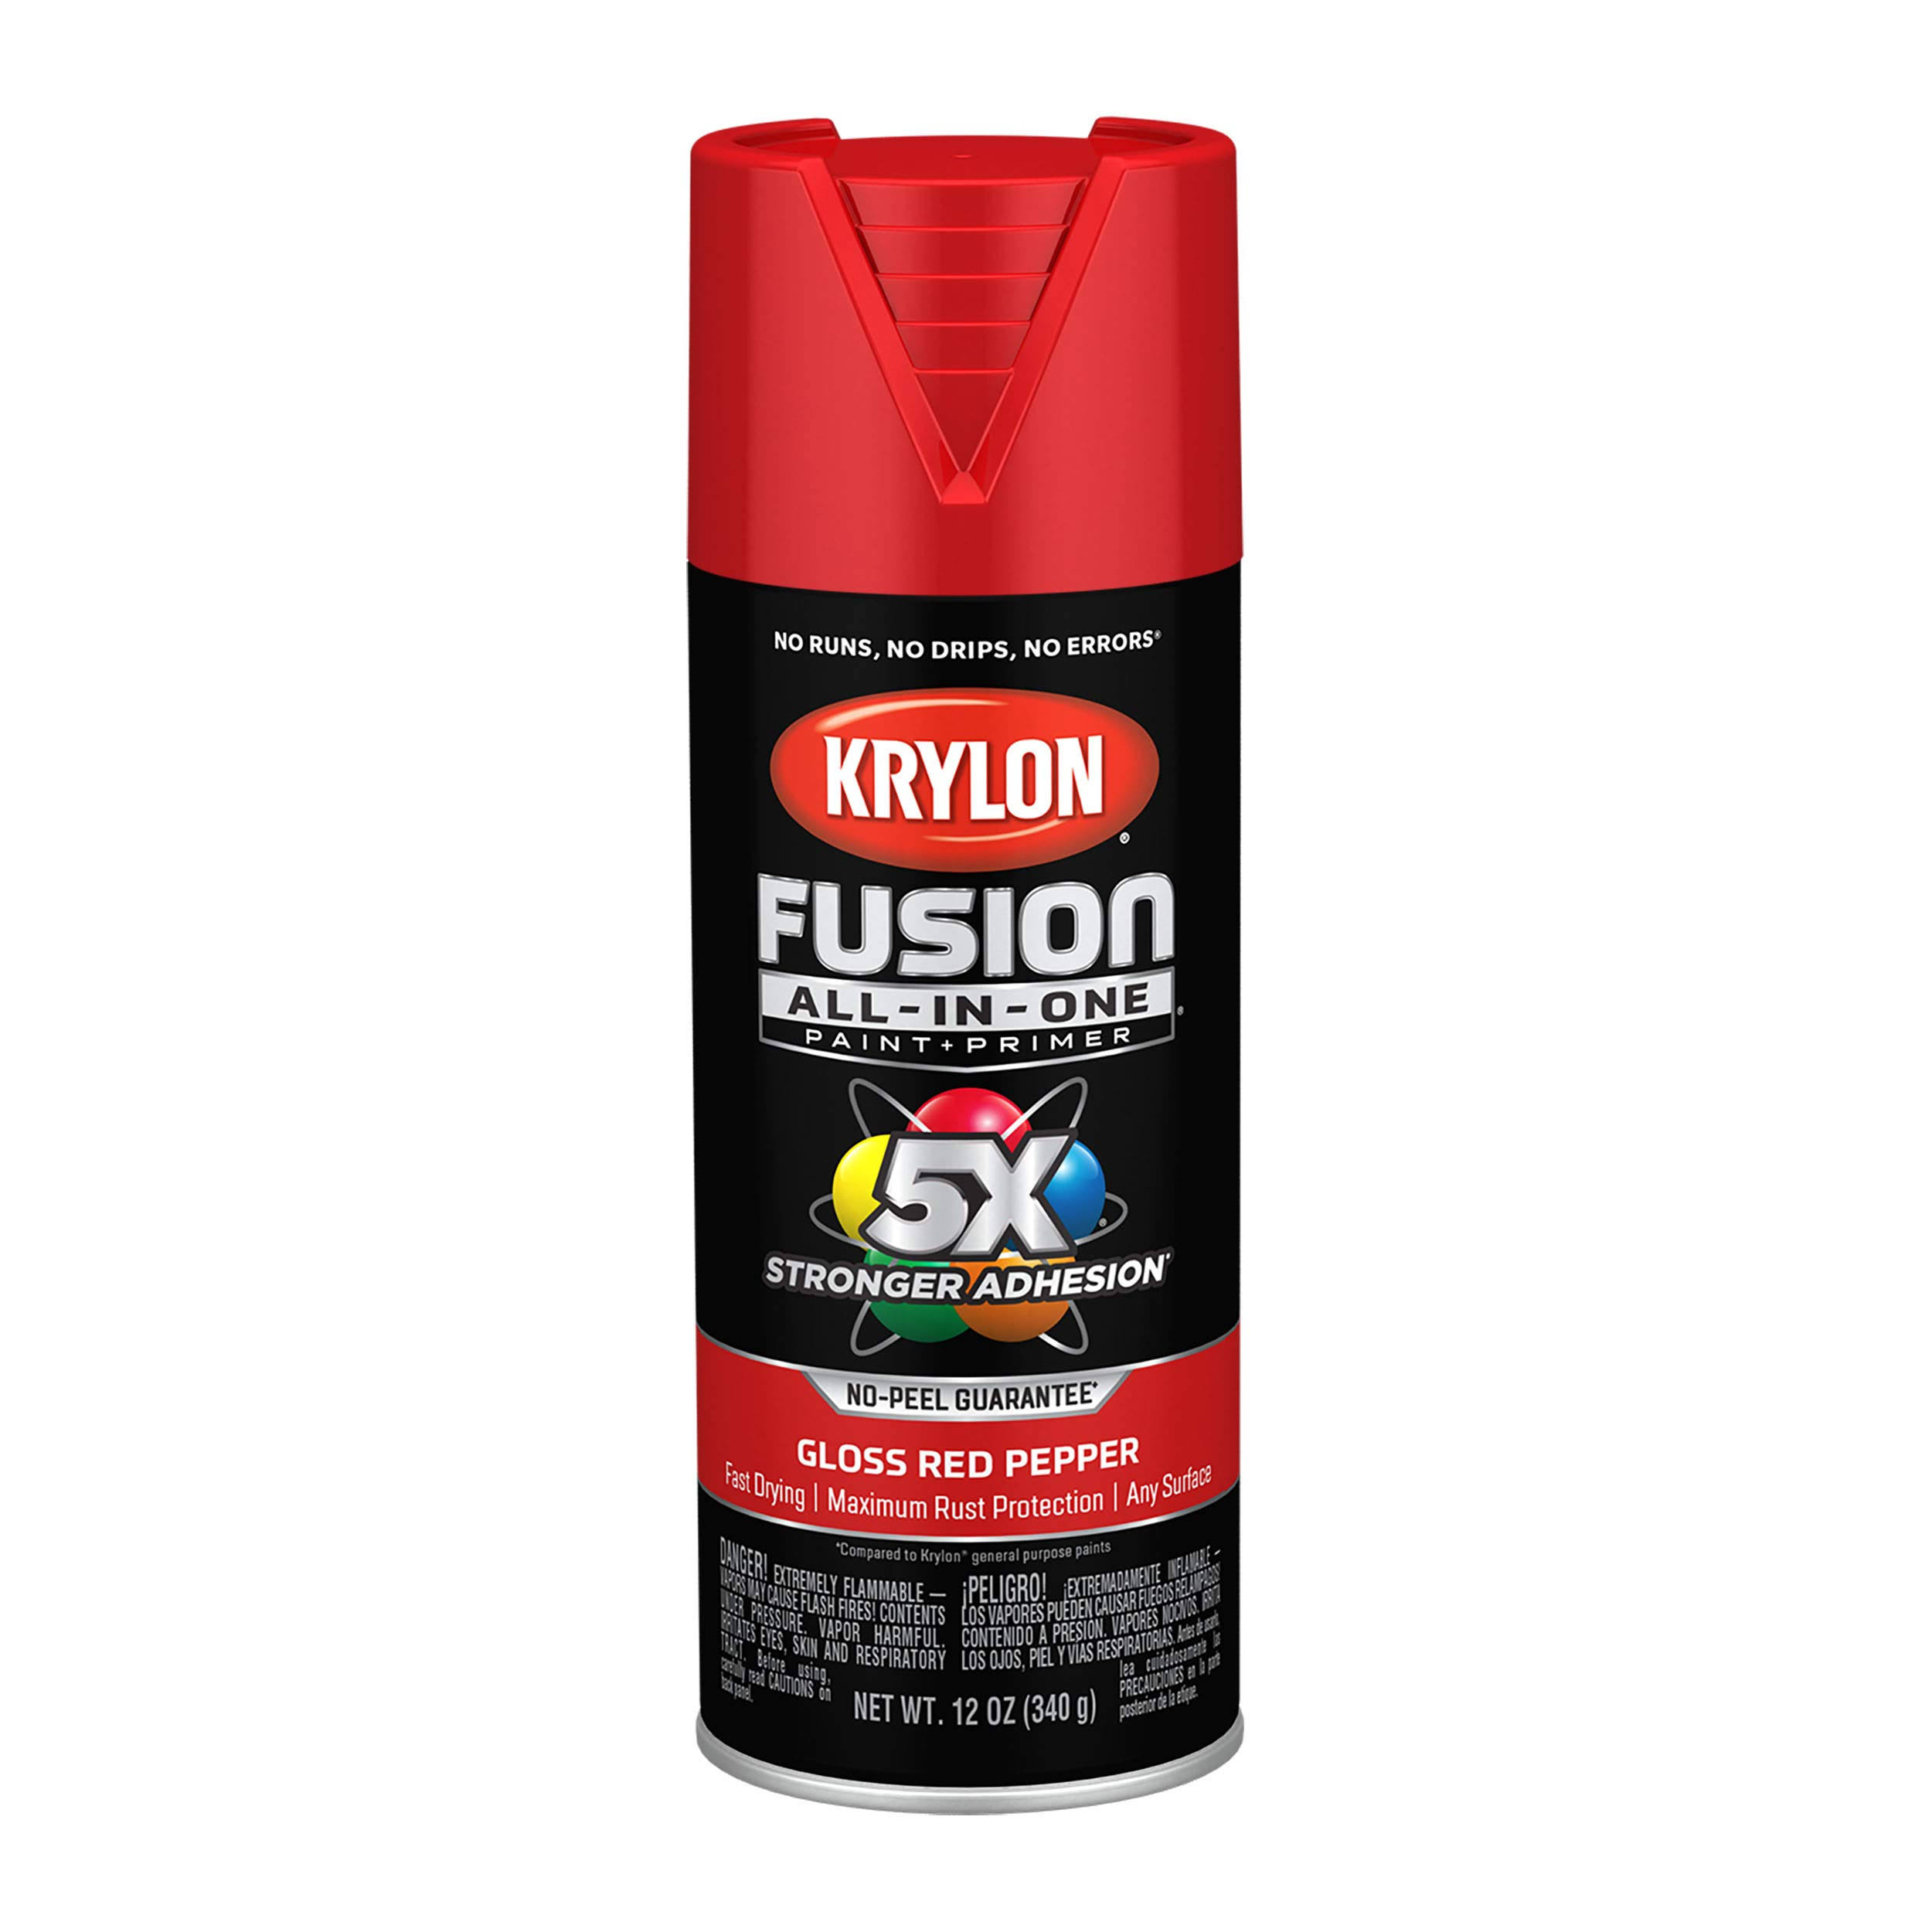 Krylon K02720007 Fusion All-In-One Spray Paint for Indoor/Outdoor Use, Gloss Red Pepper